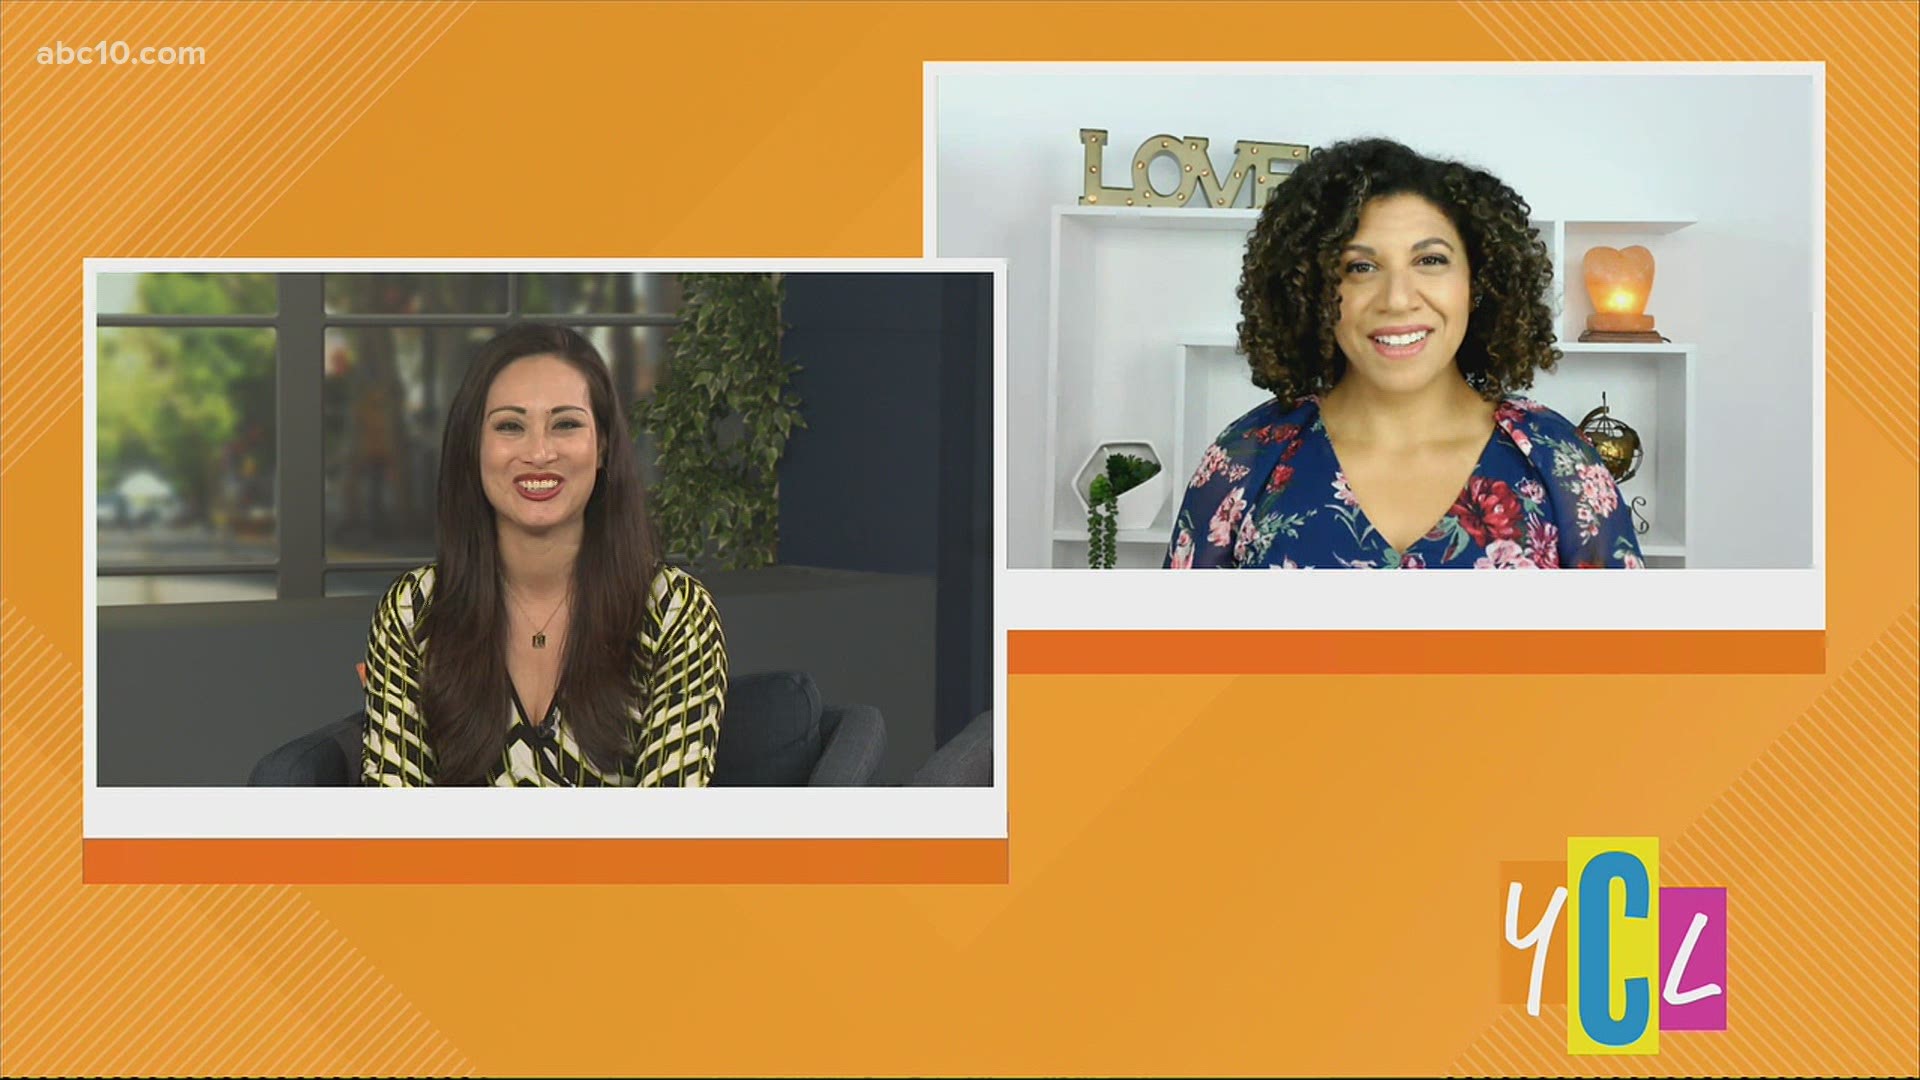 Dating expert Damona Hoffman talks about a current trend in dating, "vacci-dating," and tells us how the vaccine is affecting the dating game.